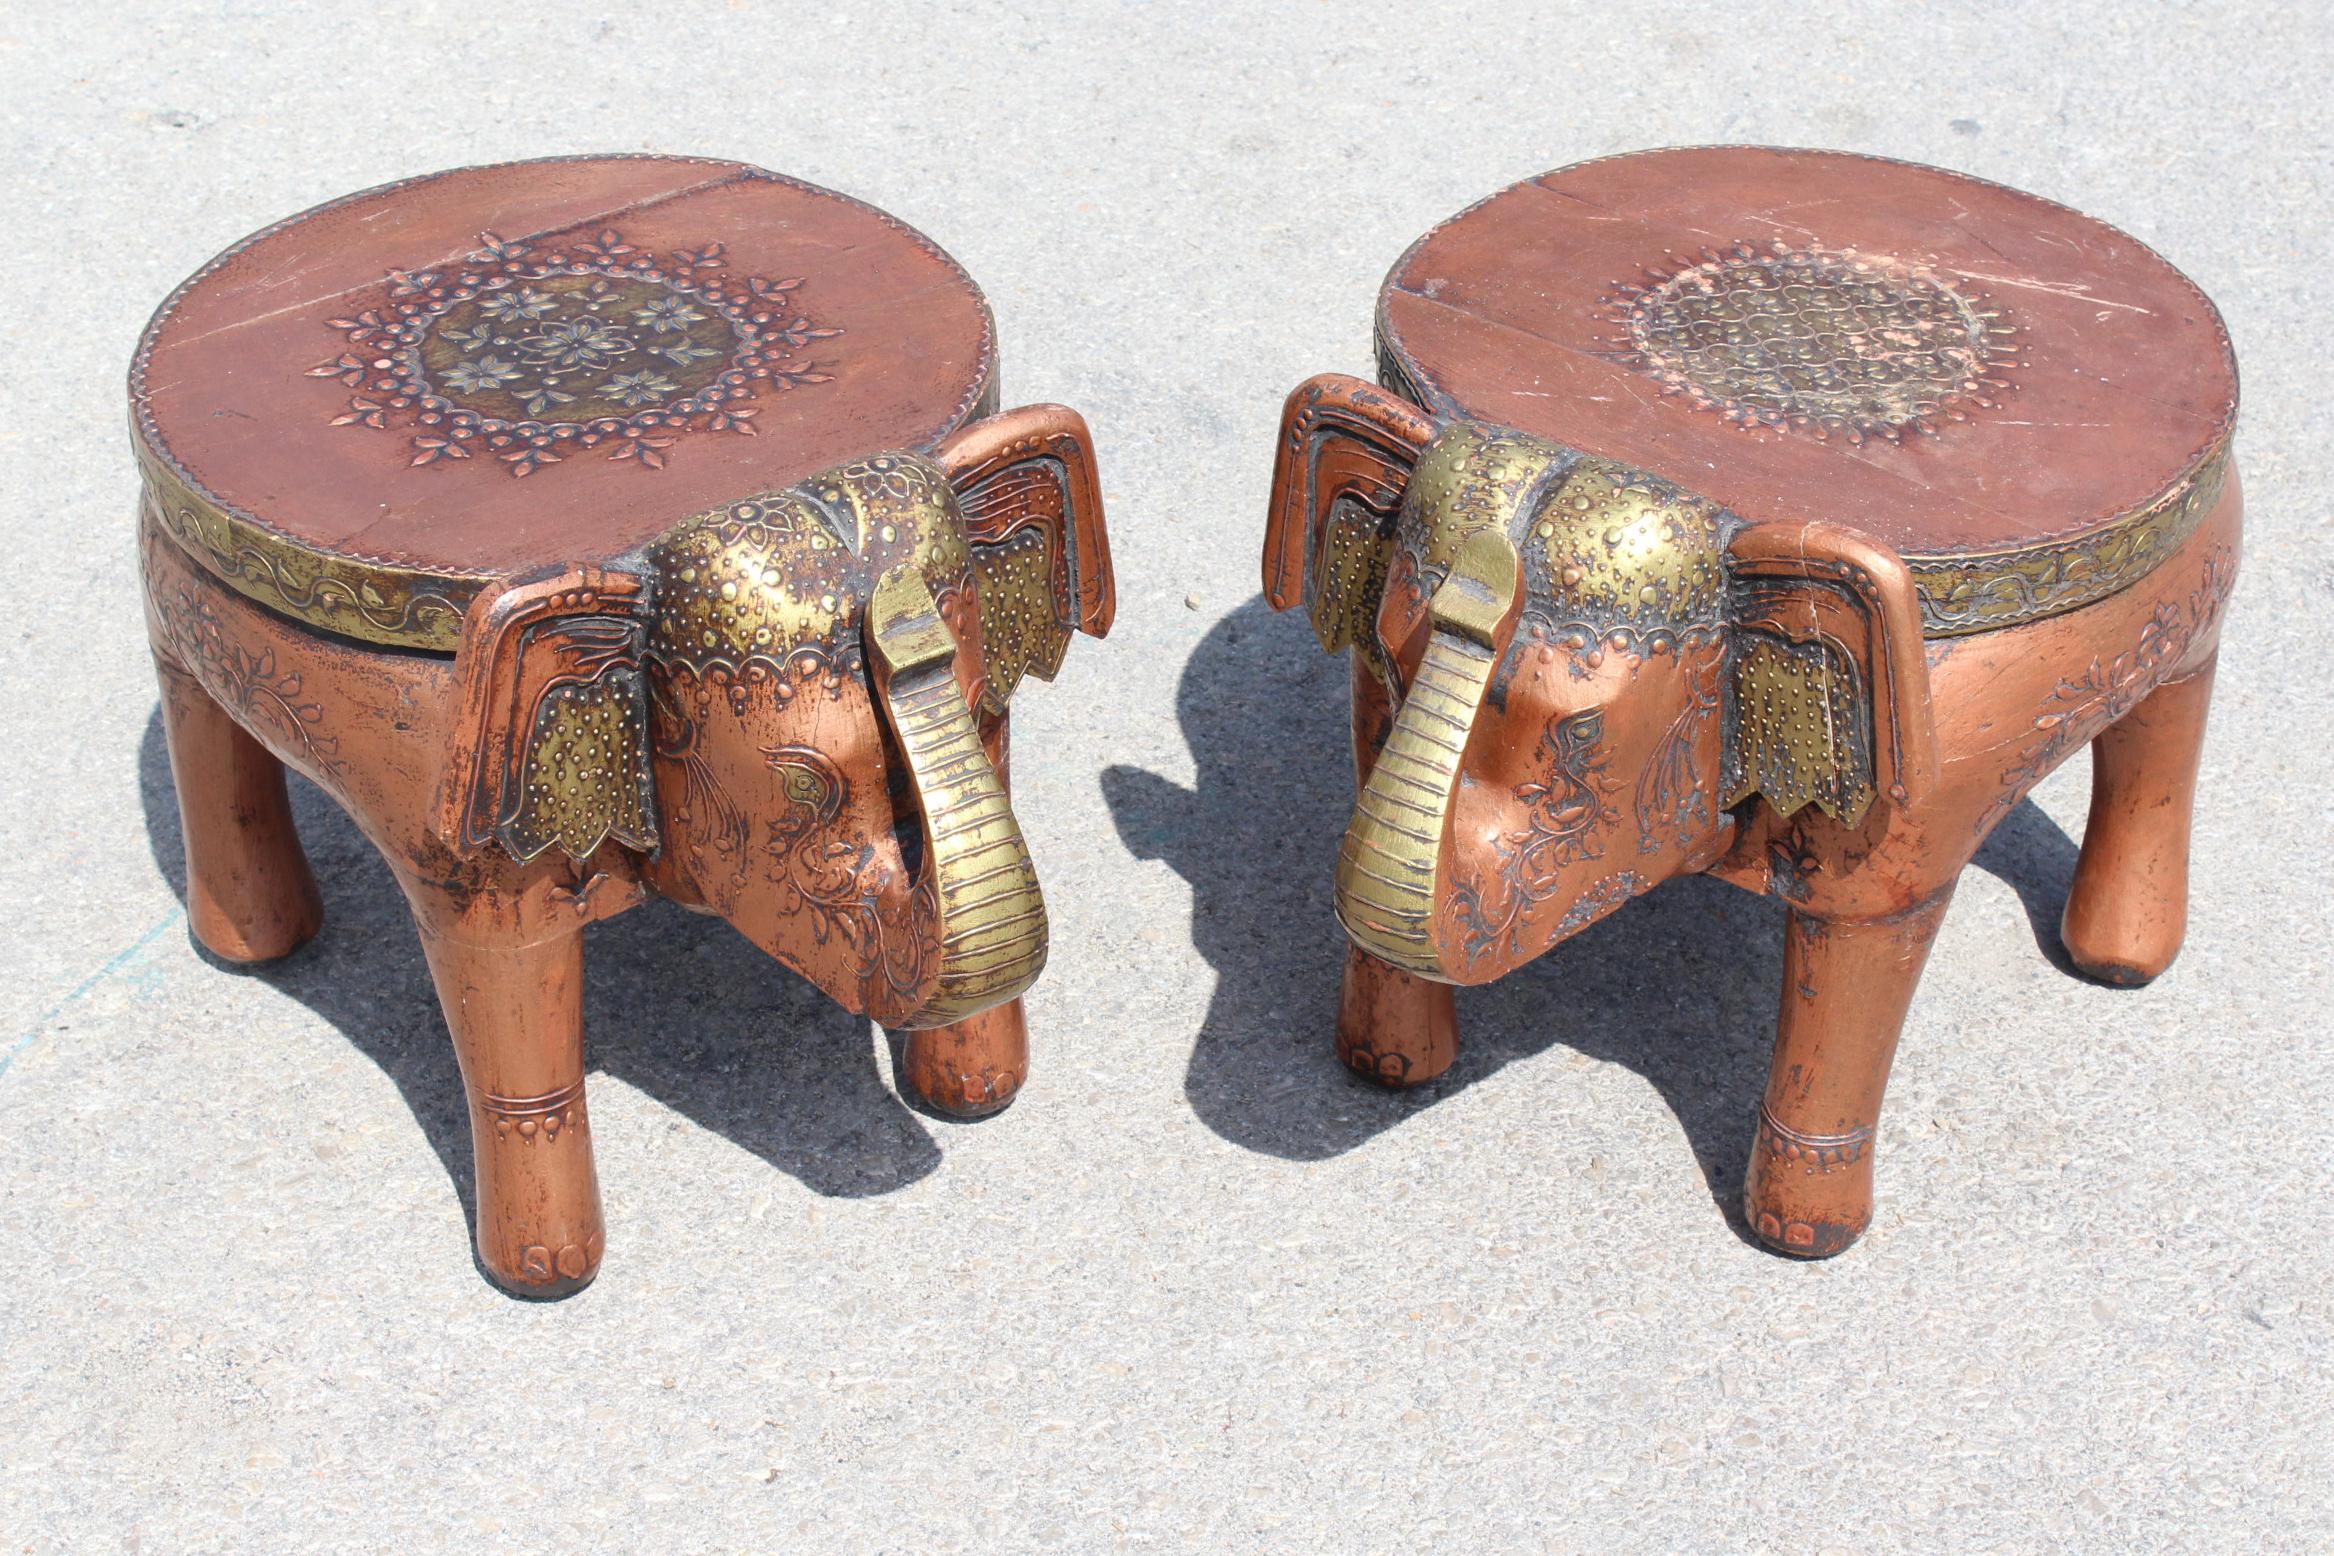 Pair of wooden hand-carved Indian low stools representing elephants.